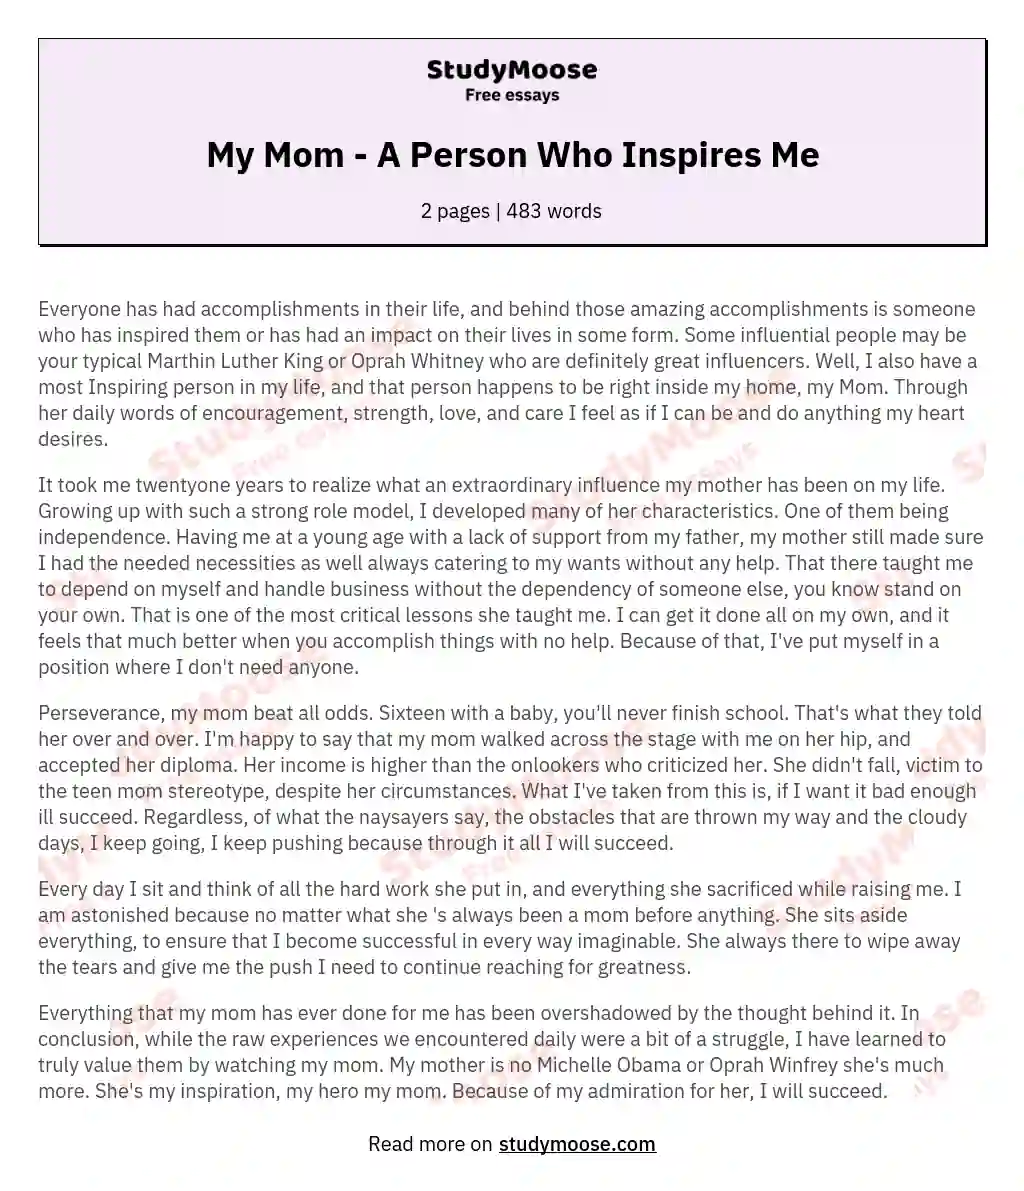 woman who inspires me essay